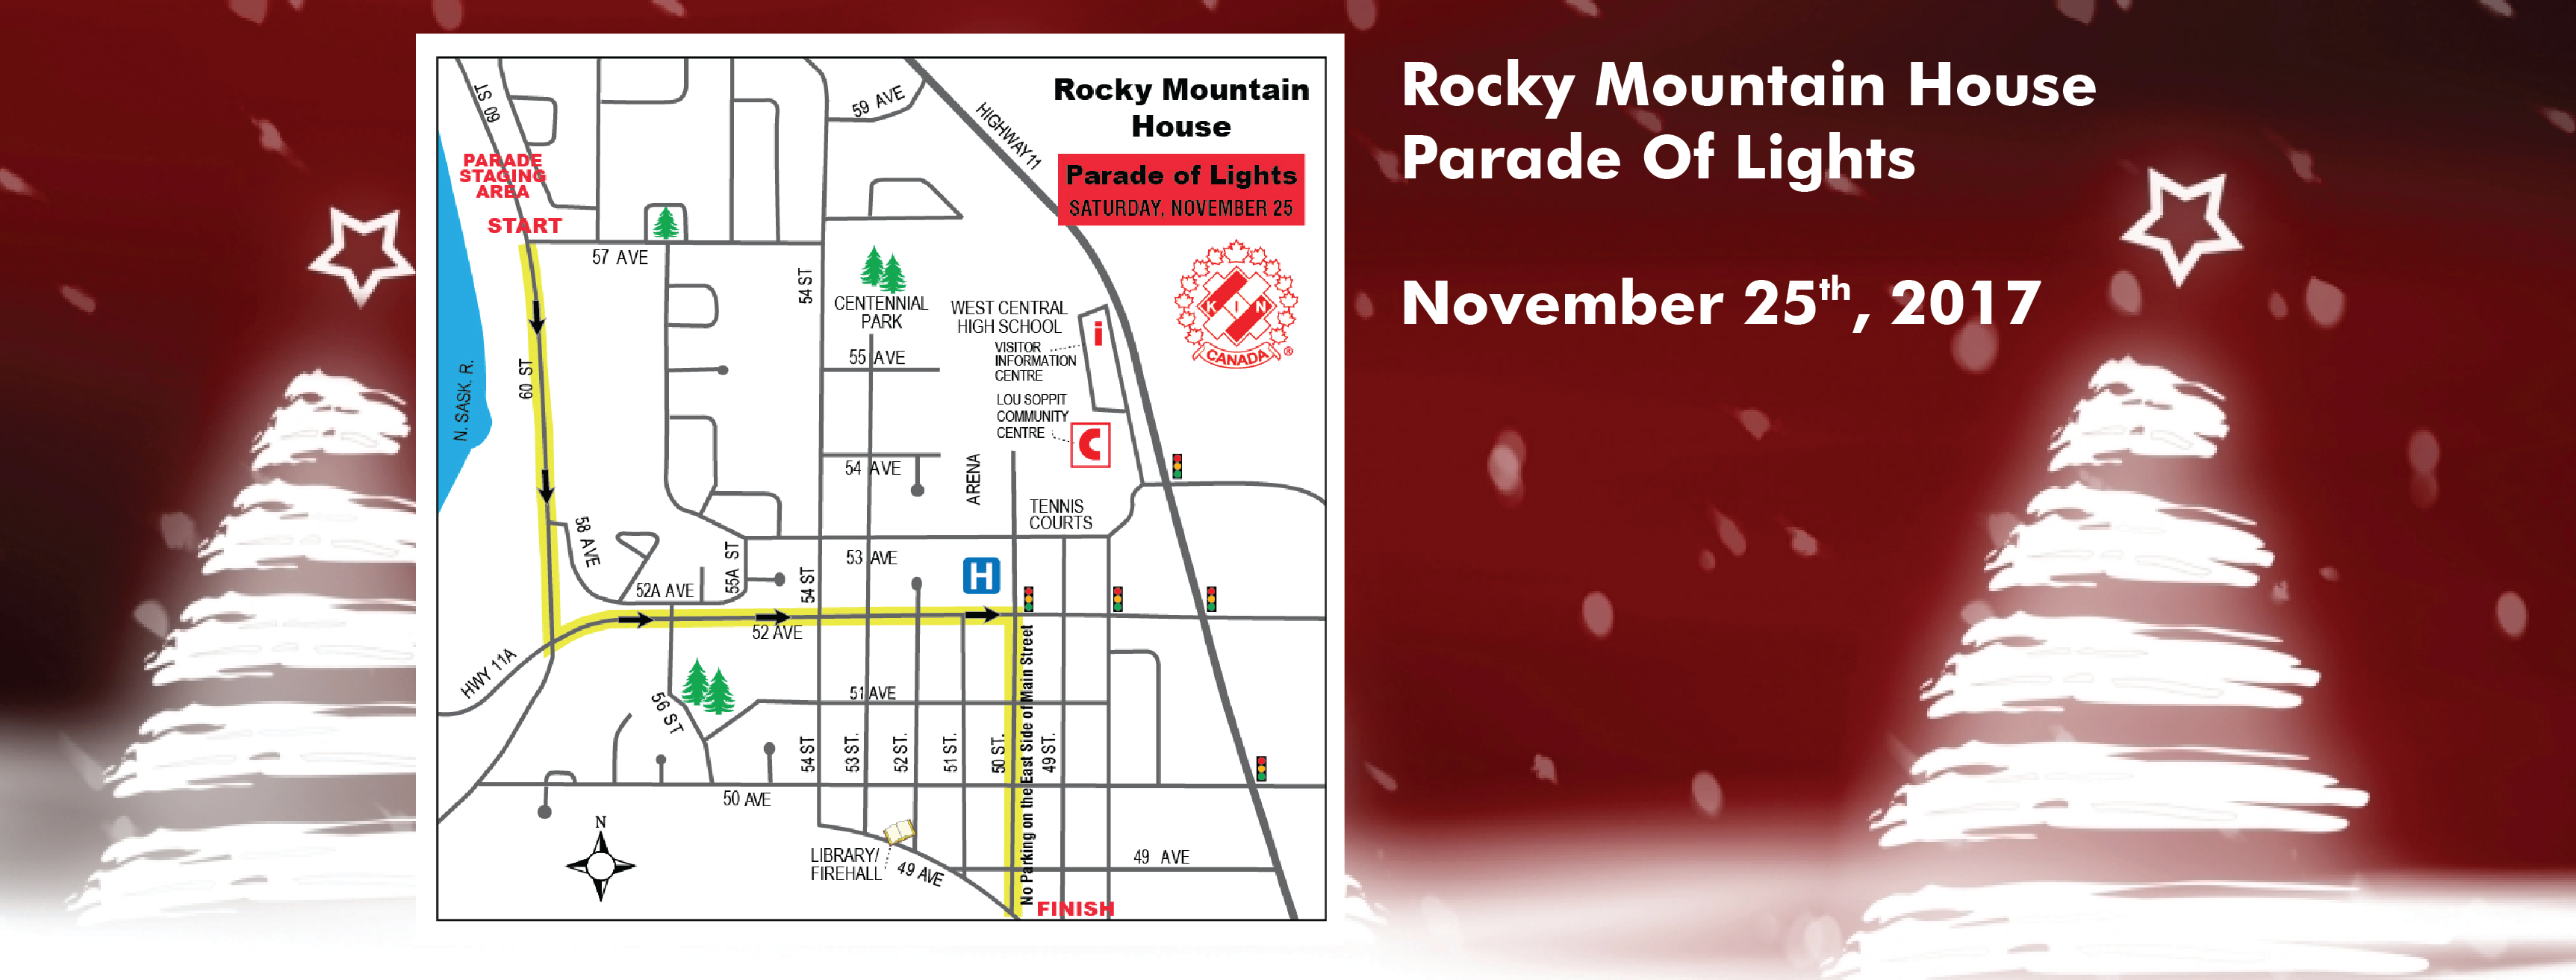 Rocky Mountain House Parade of Lights 2019